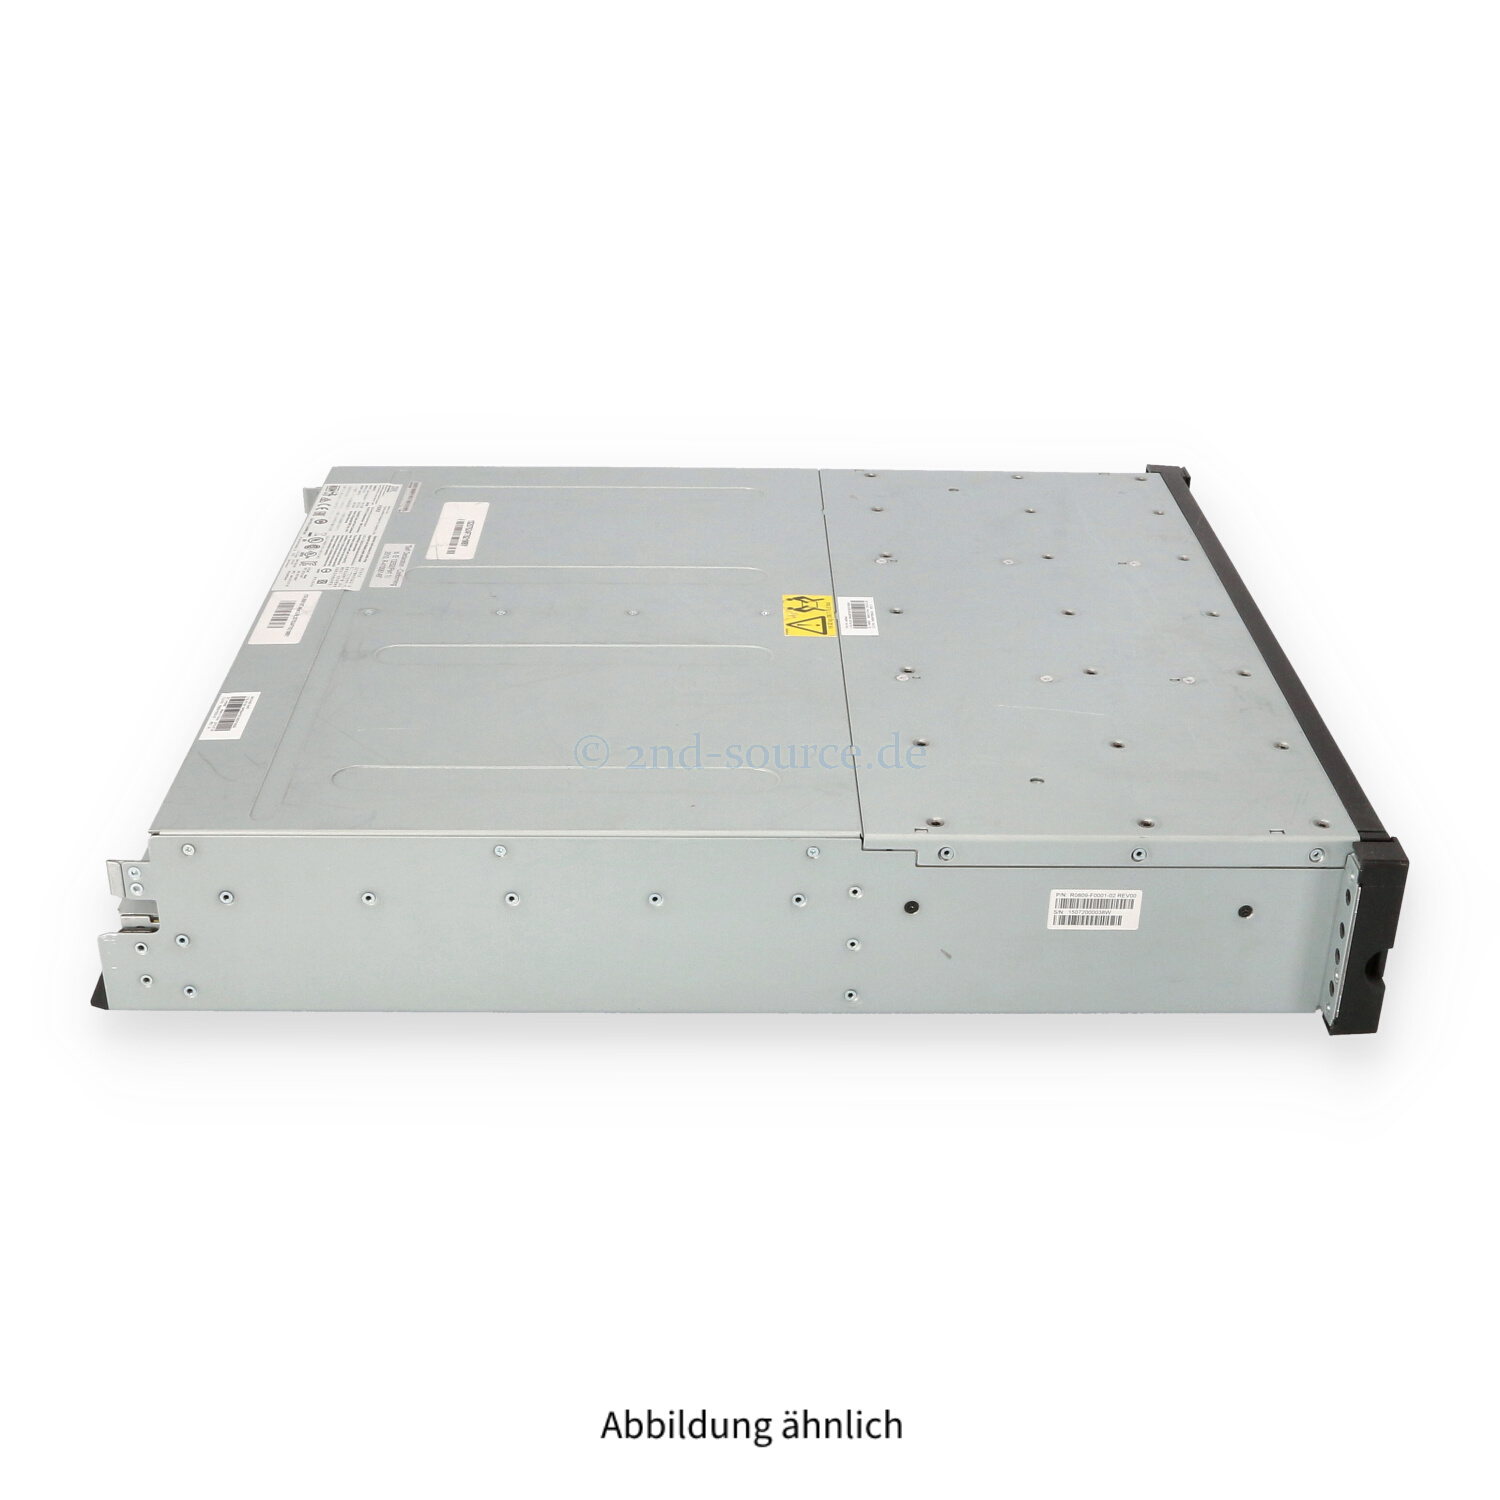 IBM V7000 G2 24xSFF Expansion Enclosure Chassis 2076-24F 64P8447